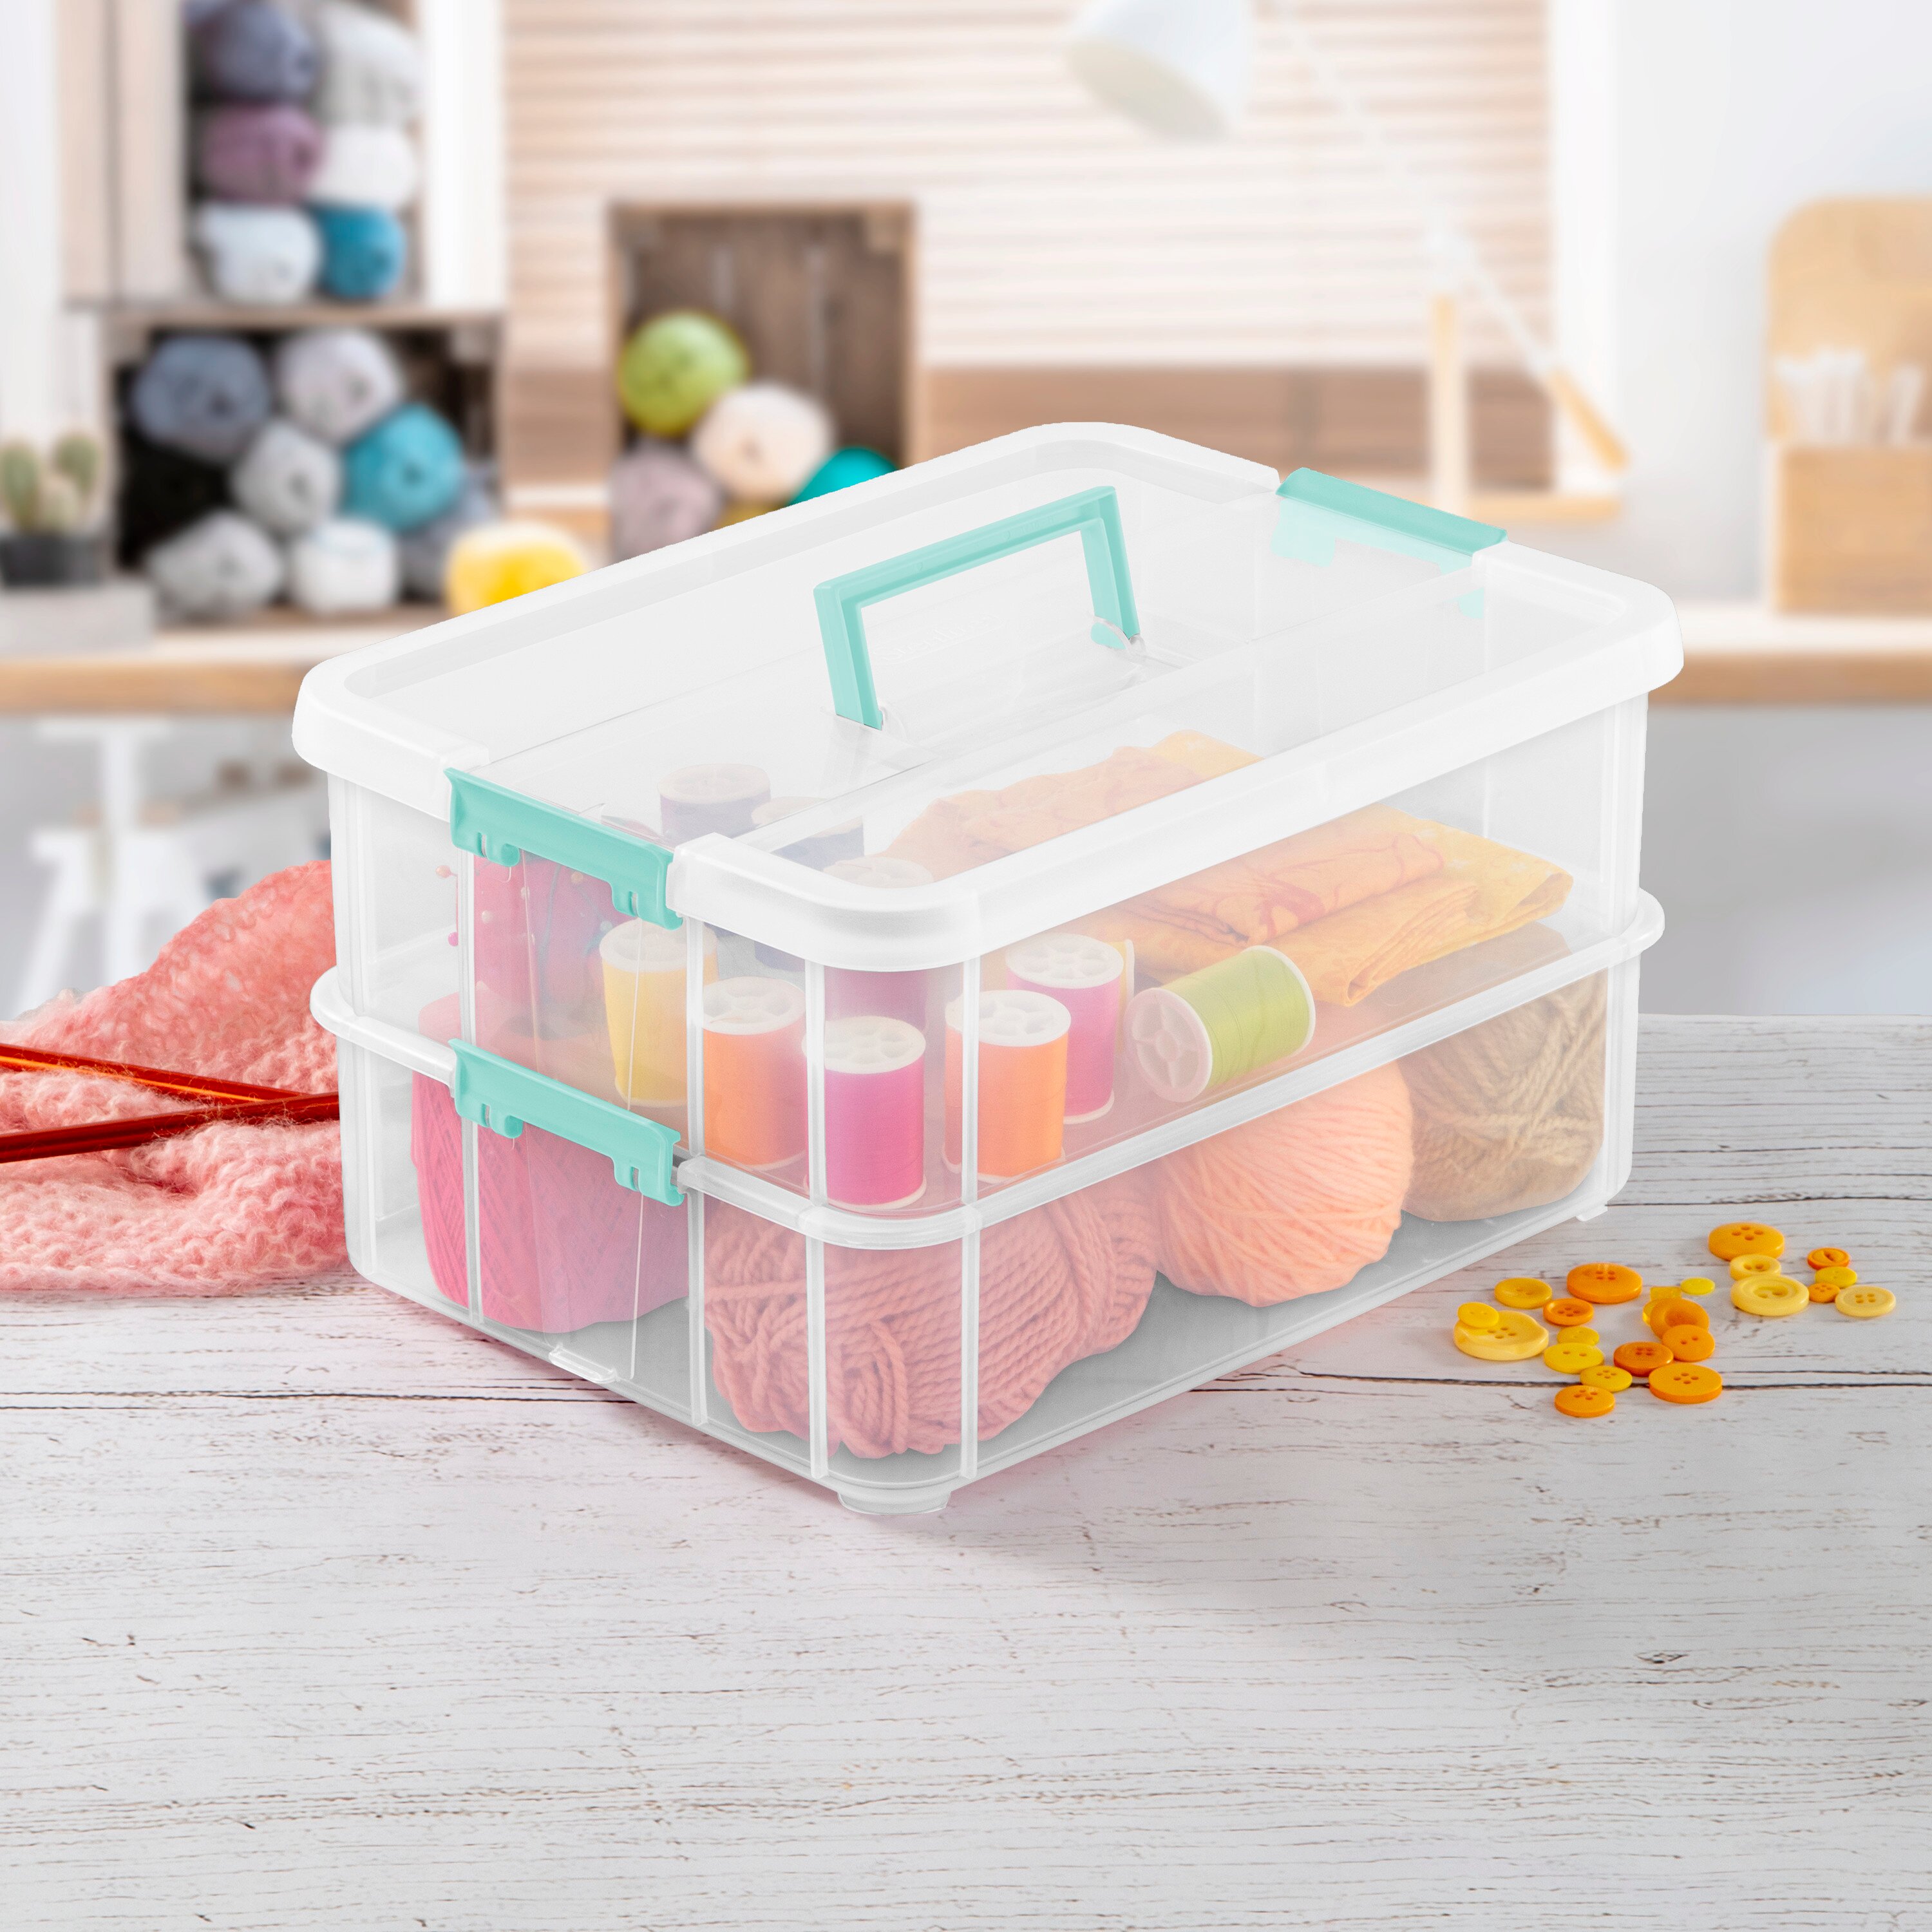 10 x 80 LITRE PLASTIC STORAGE BOX STRONG CONTAINER CHEAP CLEAR LID X LARGE 